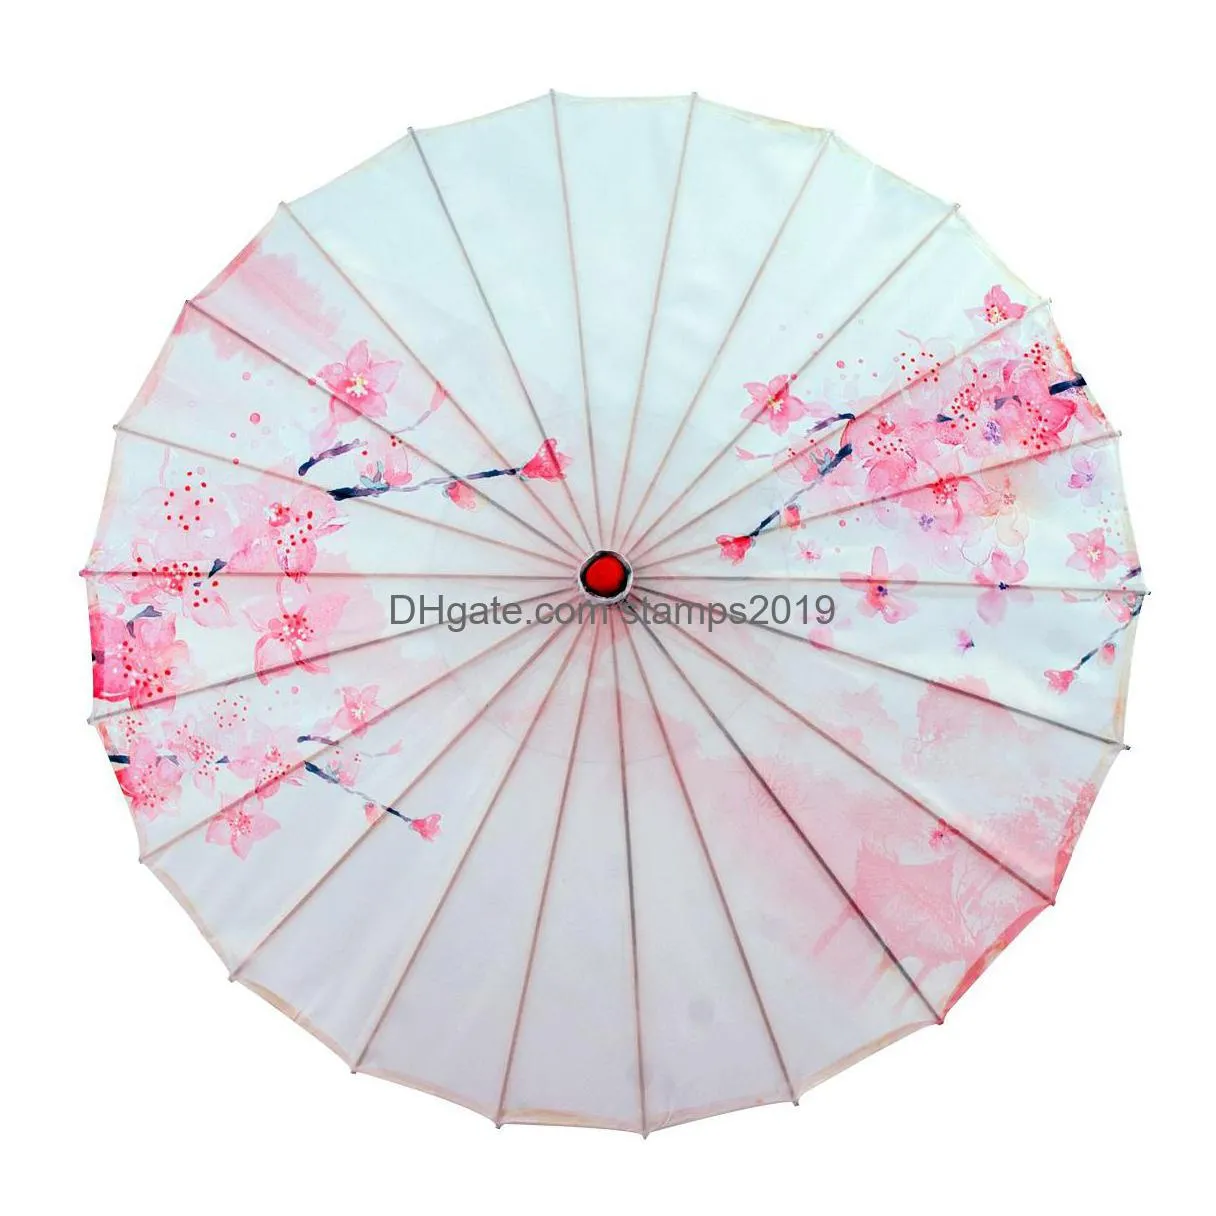 silk cloth traditional chinese umbrellas wooden handle craft umbrella adult size wedding party stage performance props